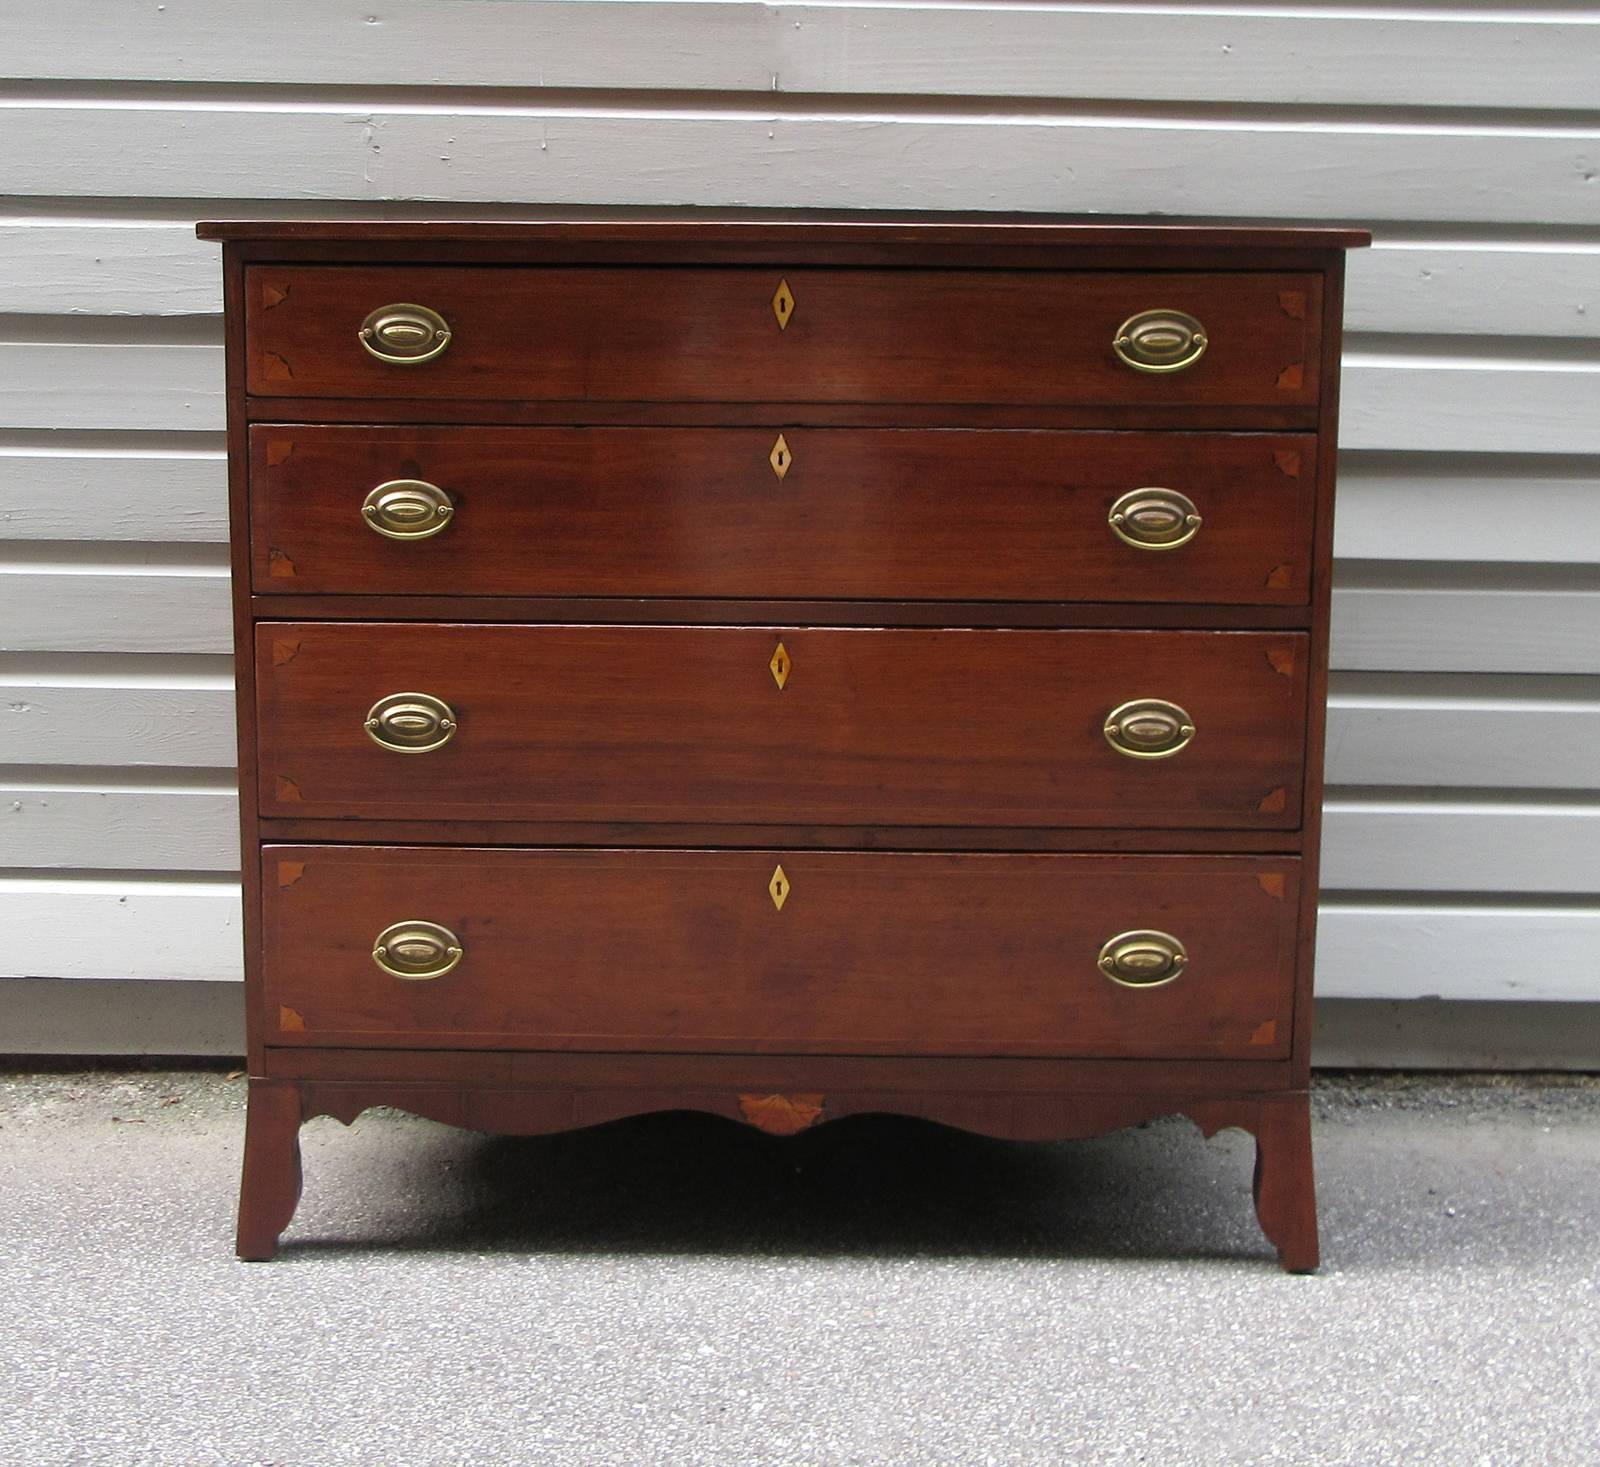 An early 19th century Virginia Federal walnut chest of drawers, circa 1800, with four drawers, compass and fan motif inlay and original brasses. The secondary wood is yellow pine.